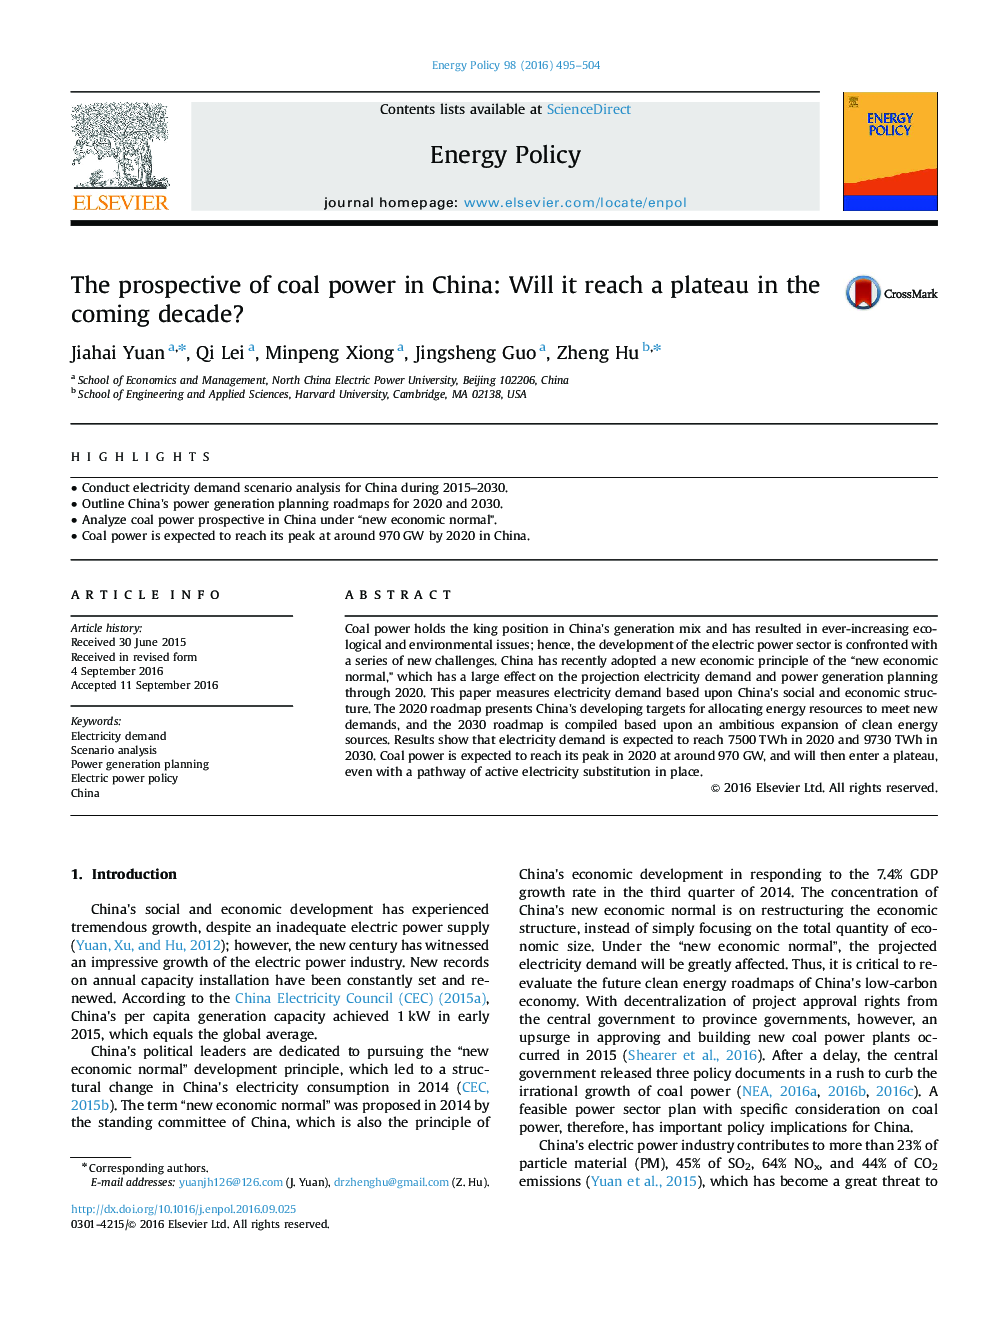 The prospective of coal power in China: Will it reach a plateau in the coming decade?